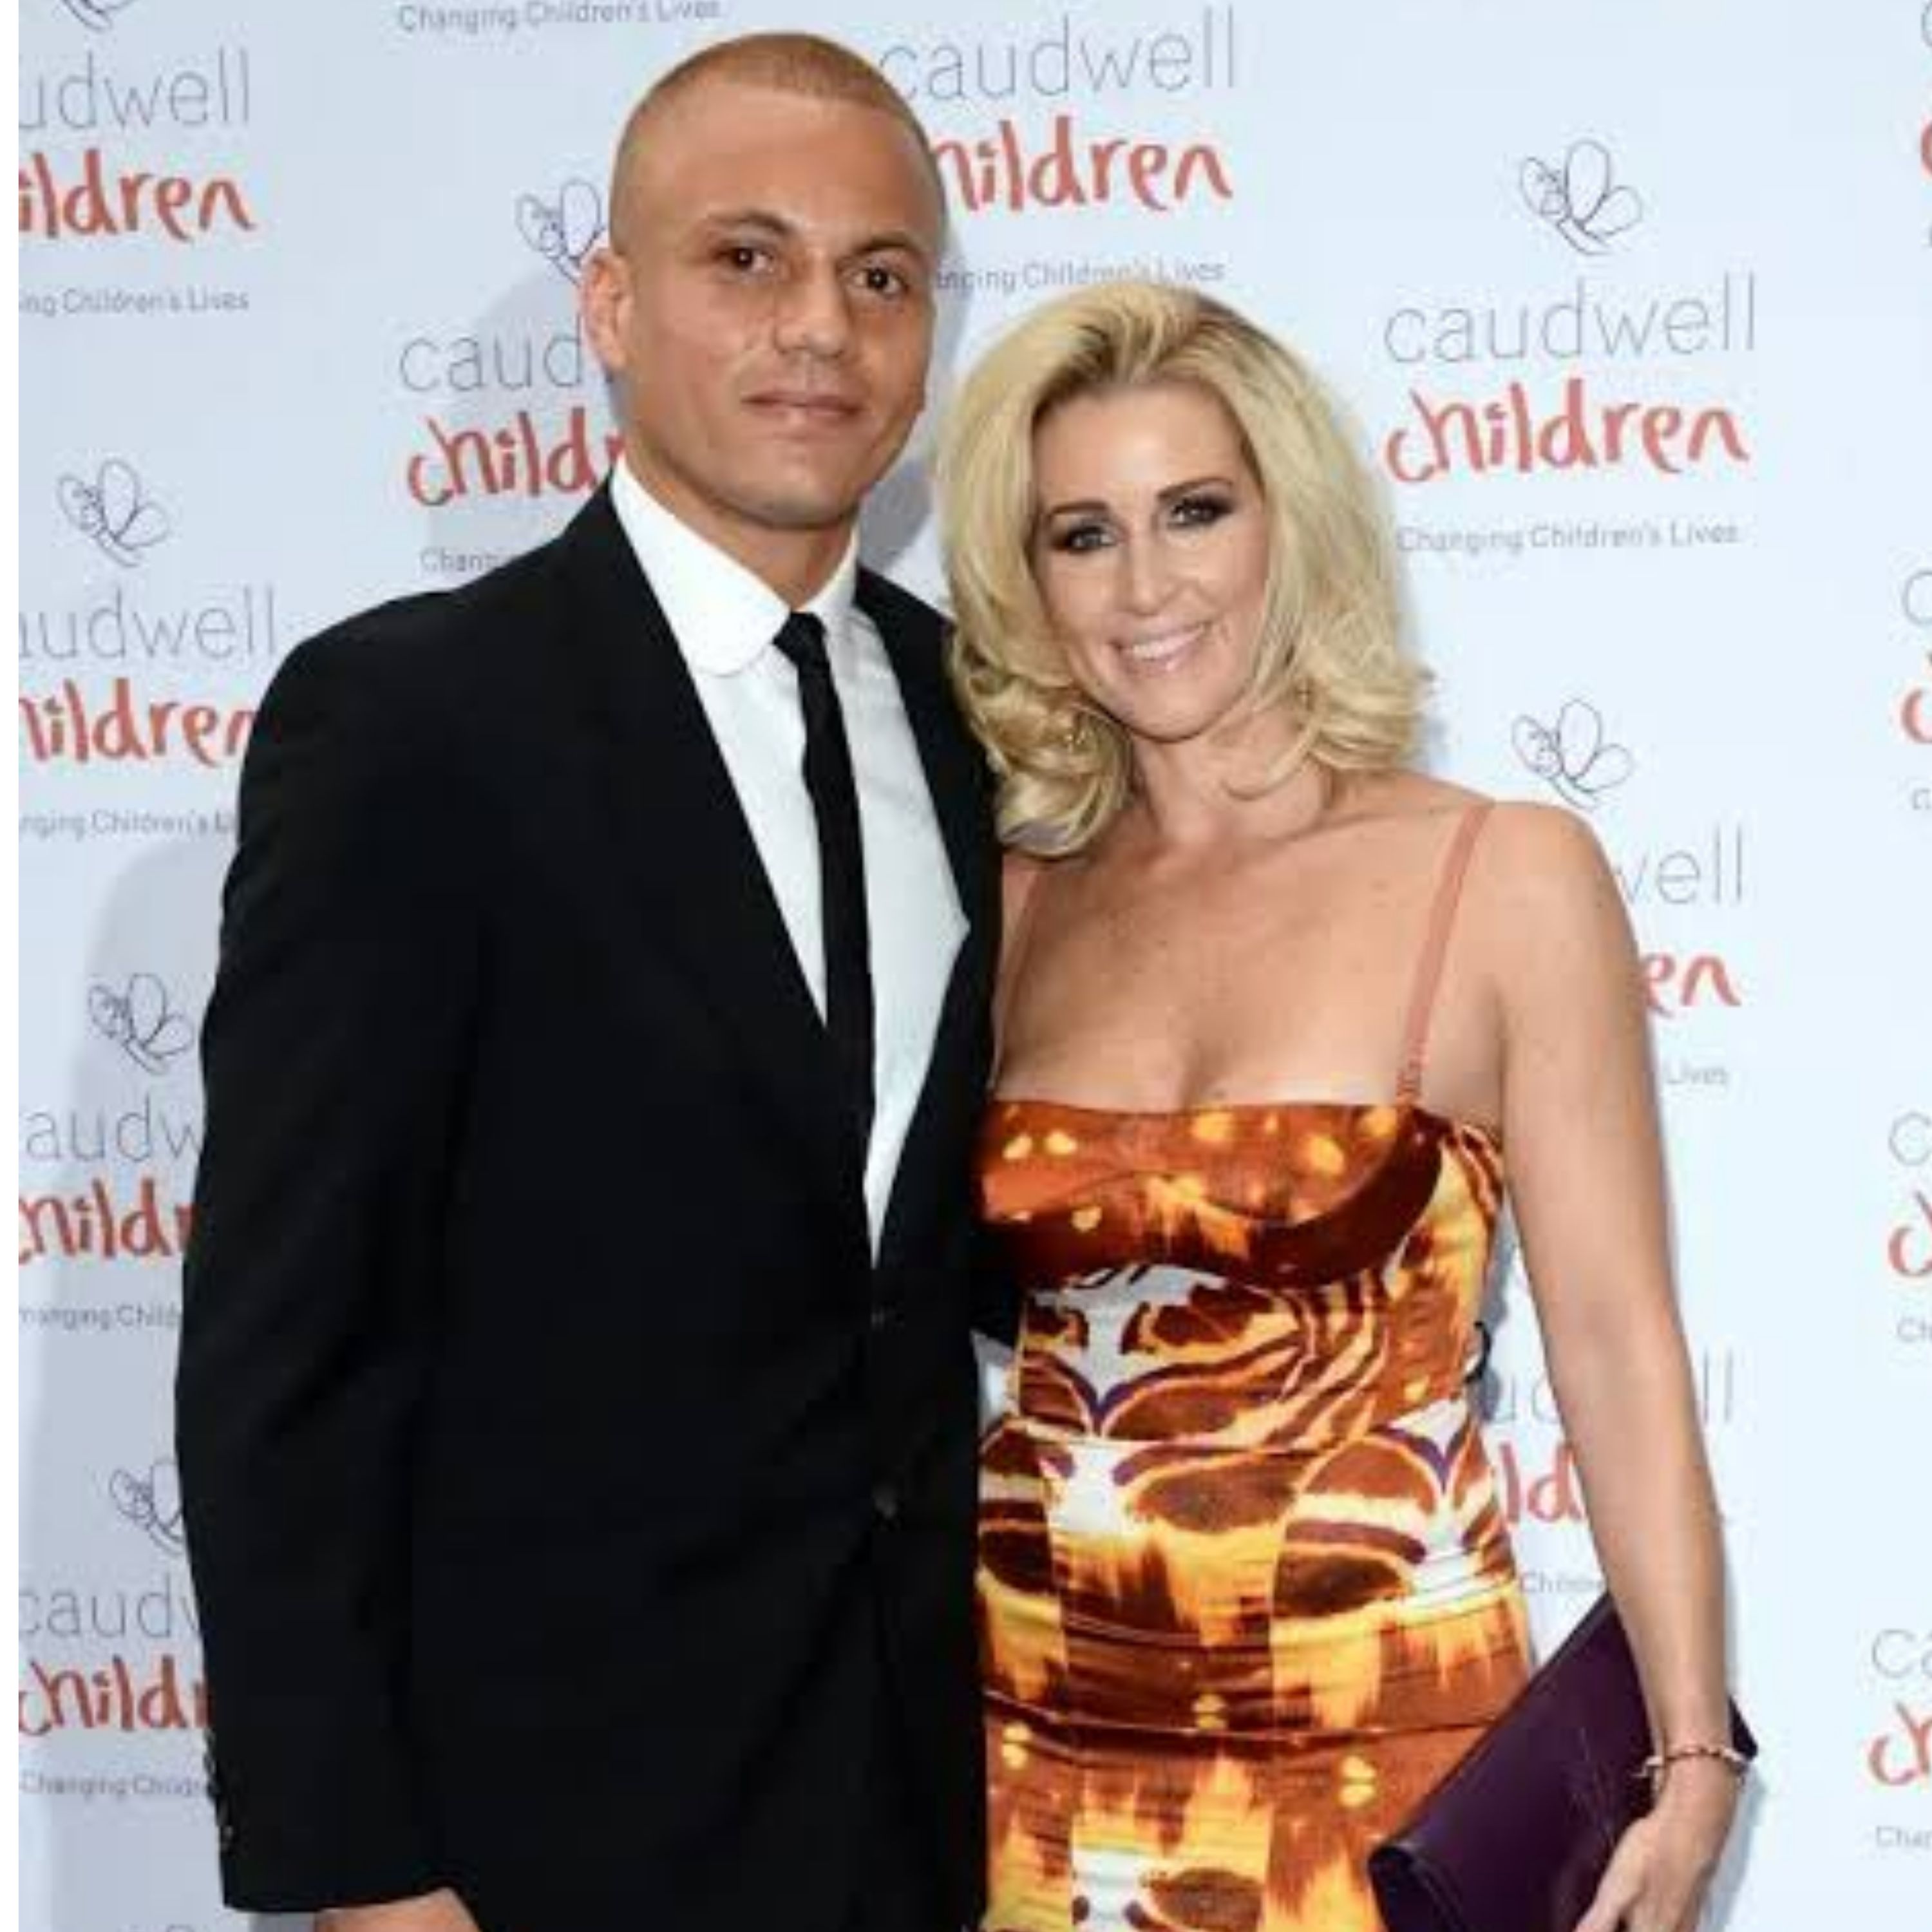 Wes Brown, who was raised in Longsight, Manchester, divorced wife Leanne last year.